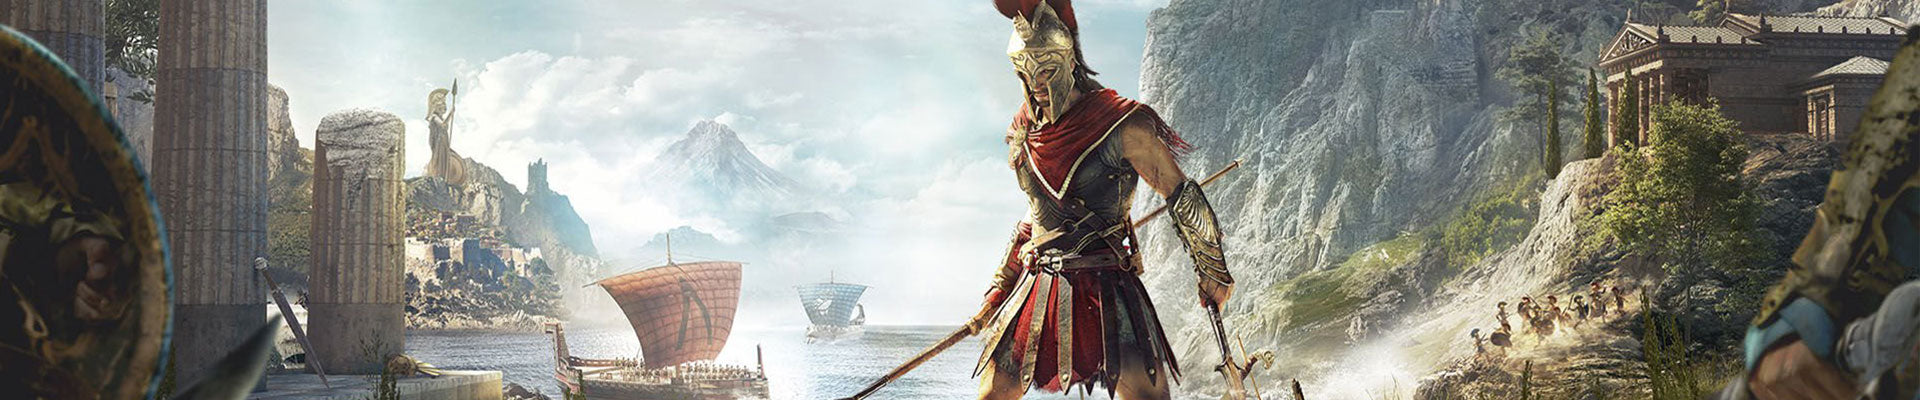 Assassin's Creed Odyssey Art category